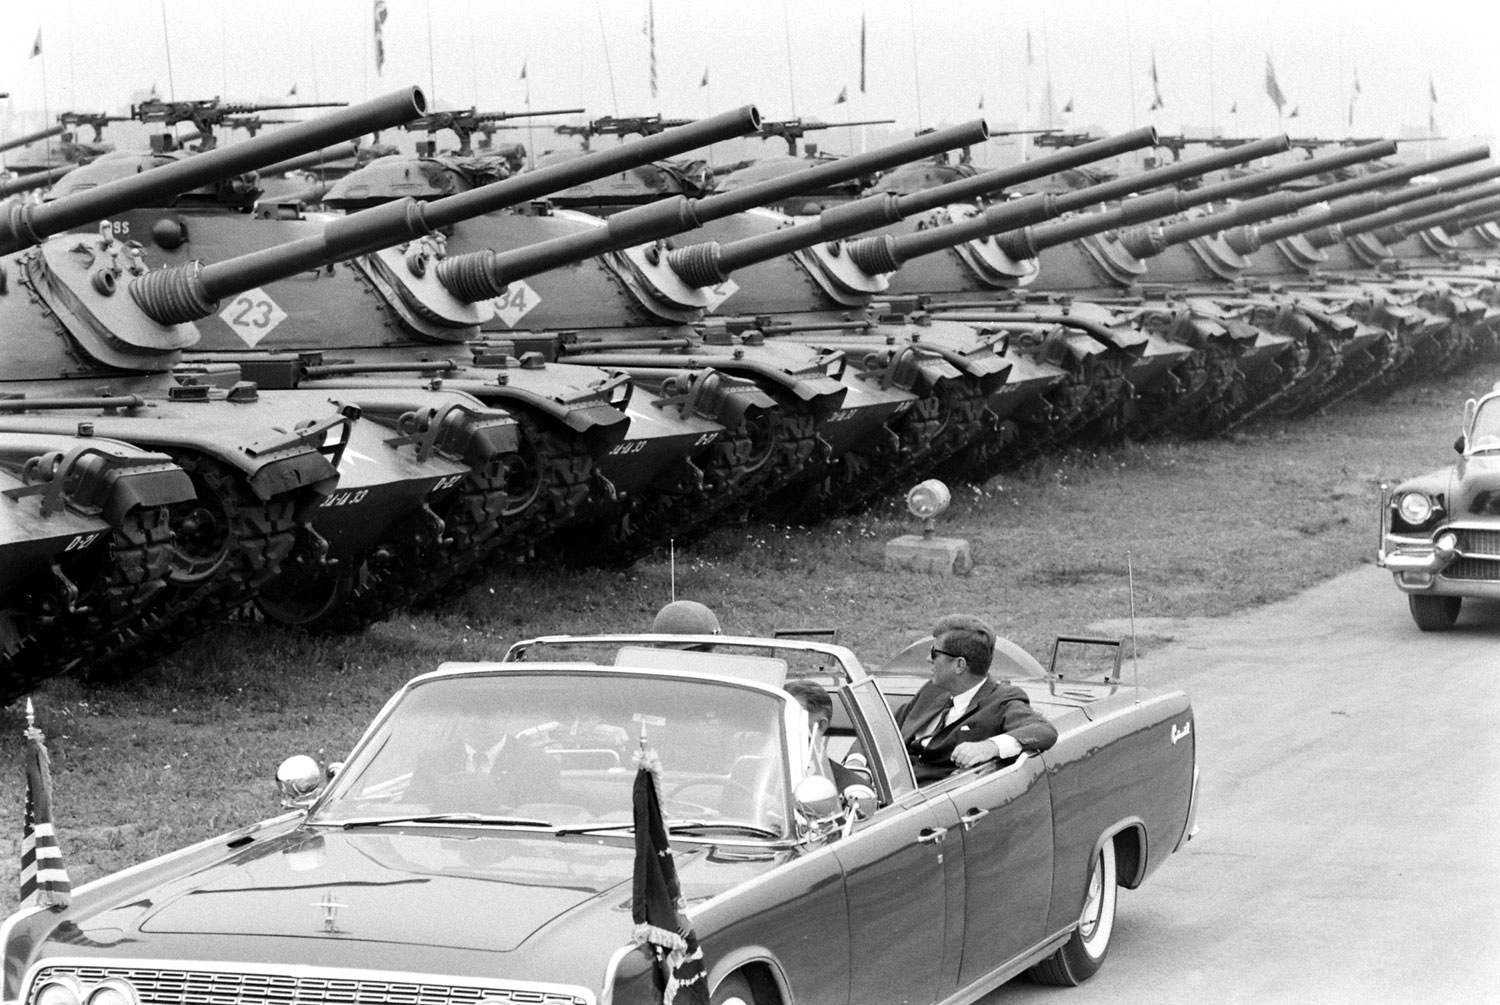 President John F. Kennedy, in open limo, reviews the U.S. Army's 3rd Armored Division ("Spearhead"), West Germany, June 1963.